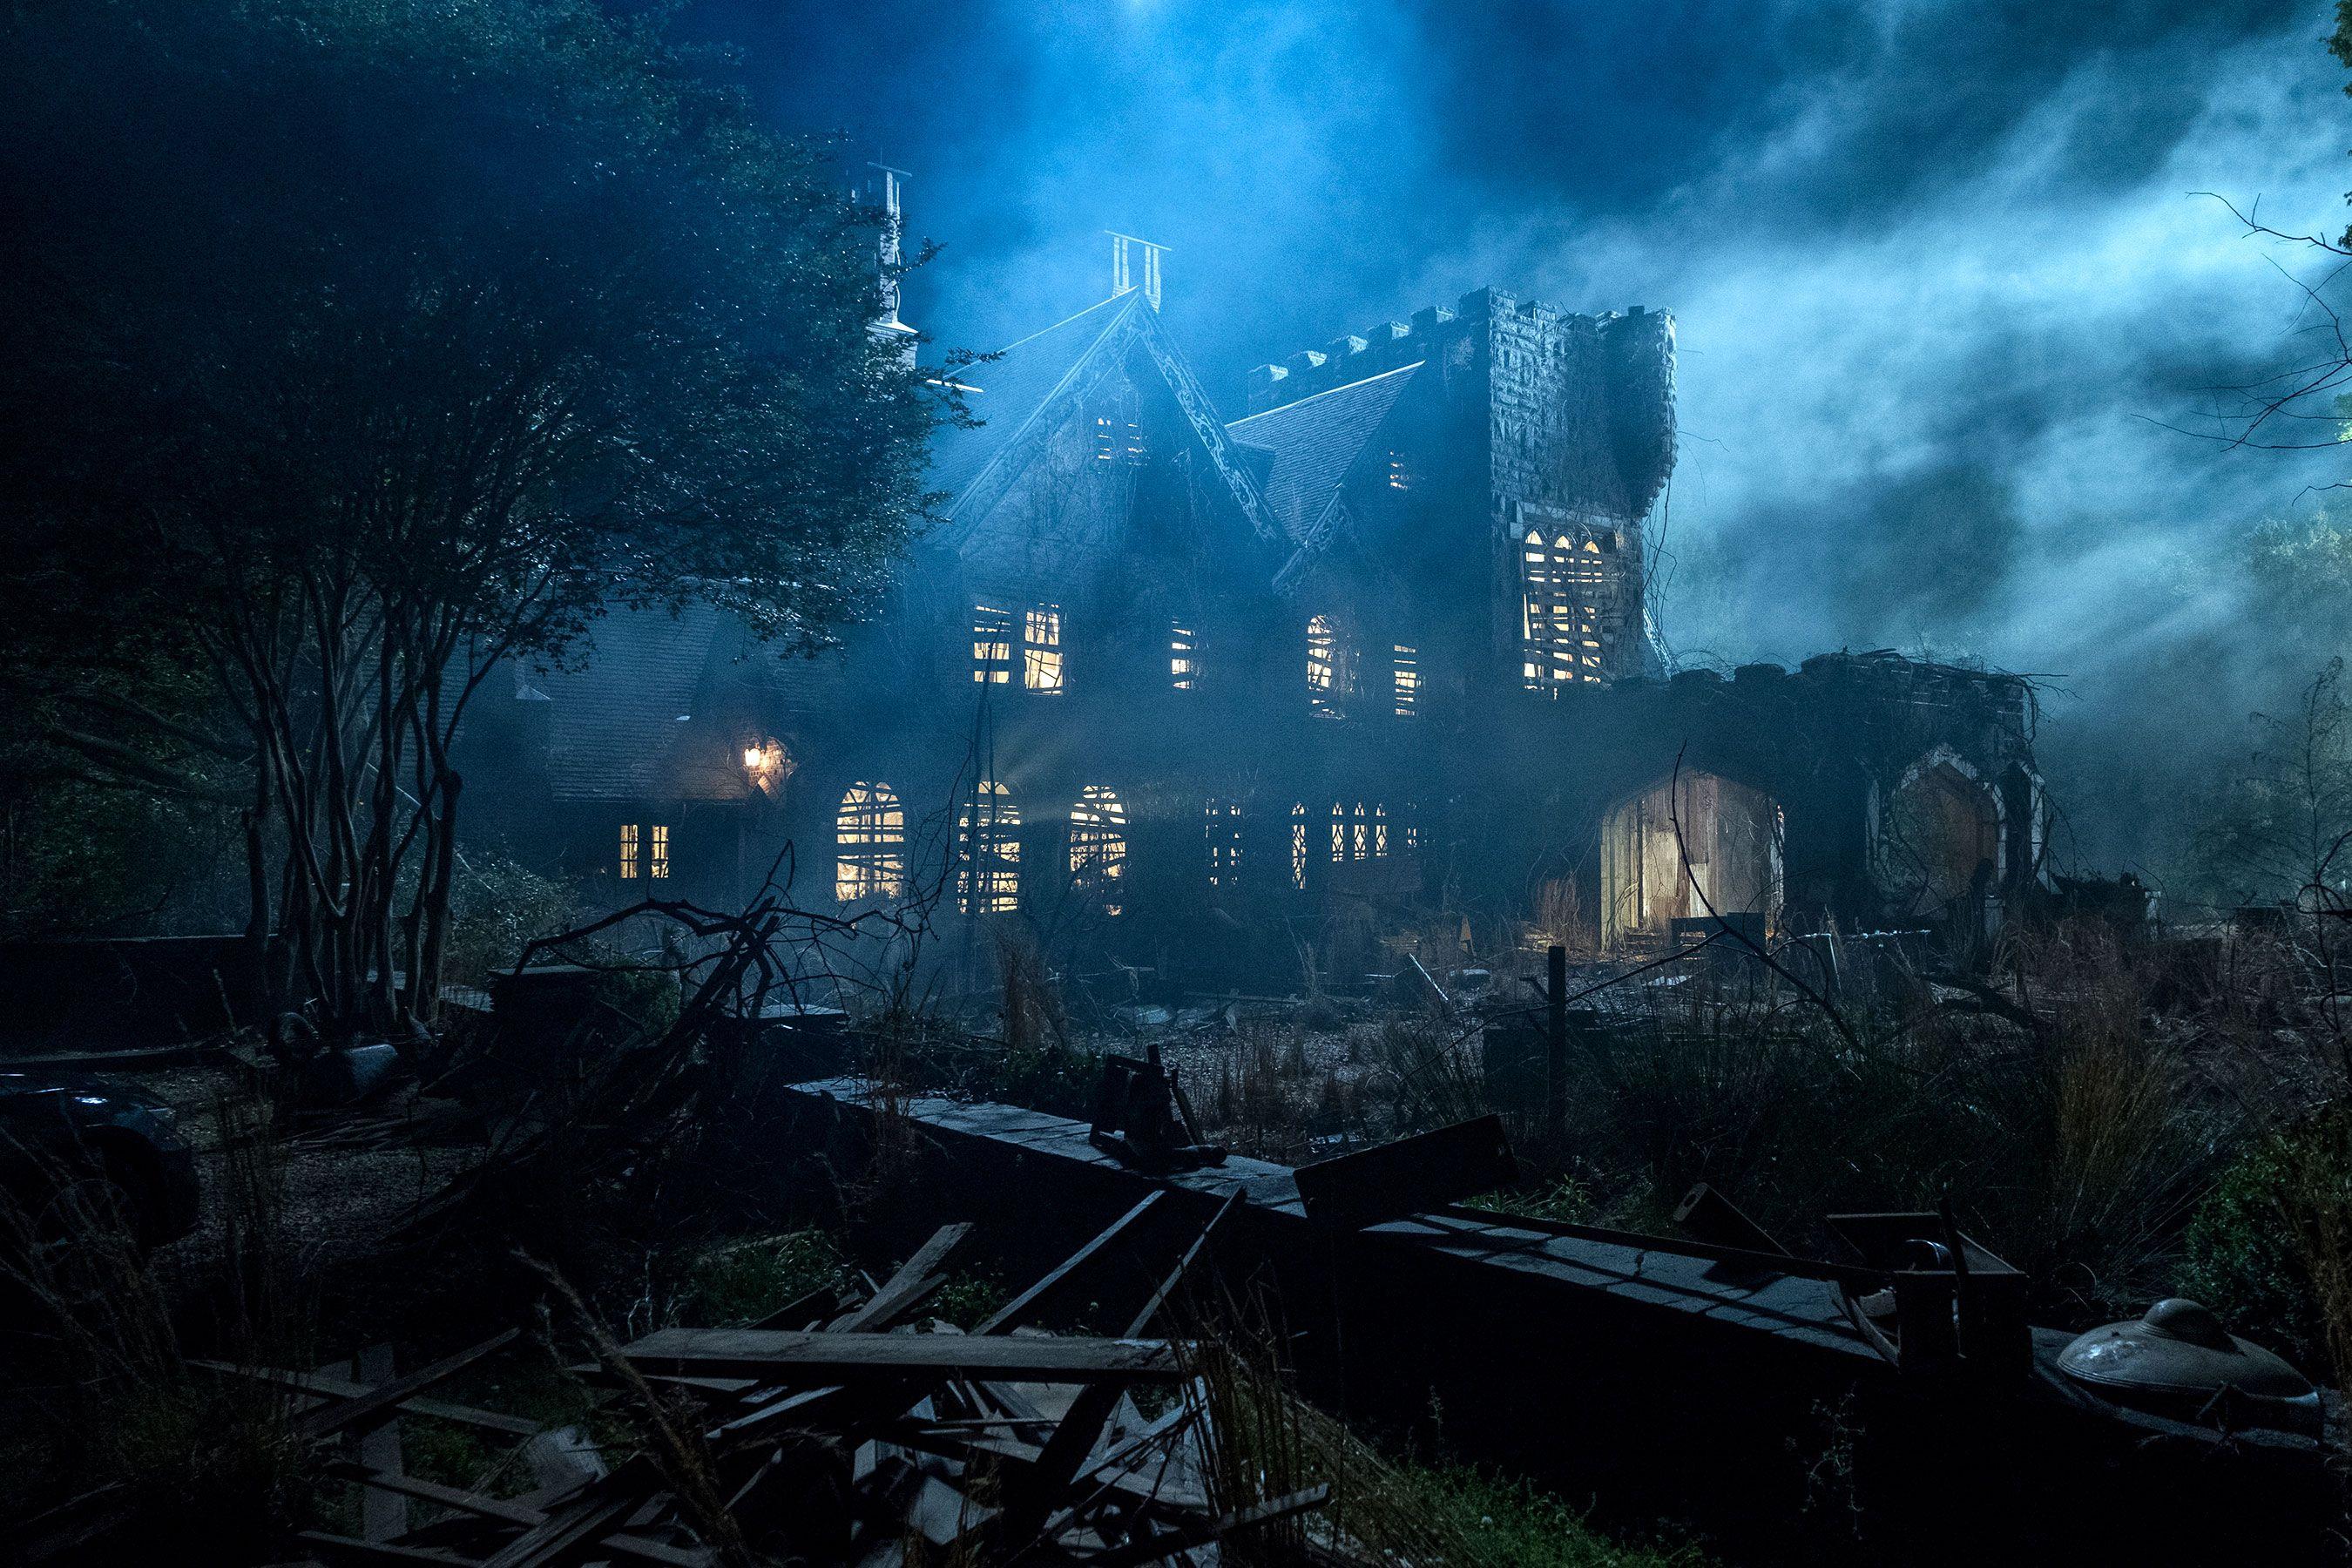 Netflix's The Haunting of Hill House reveals first image, premiere